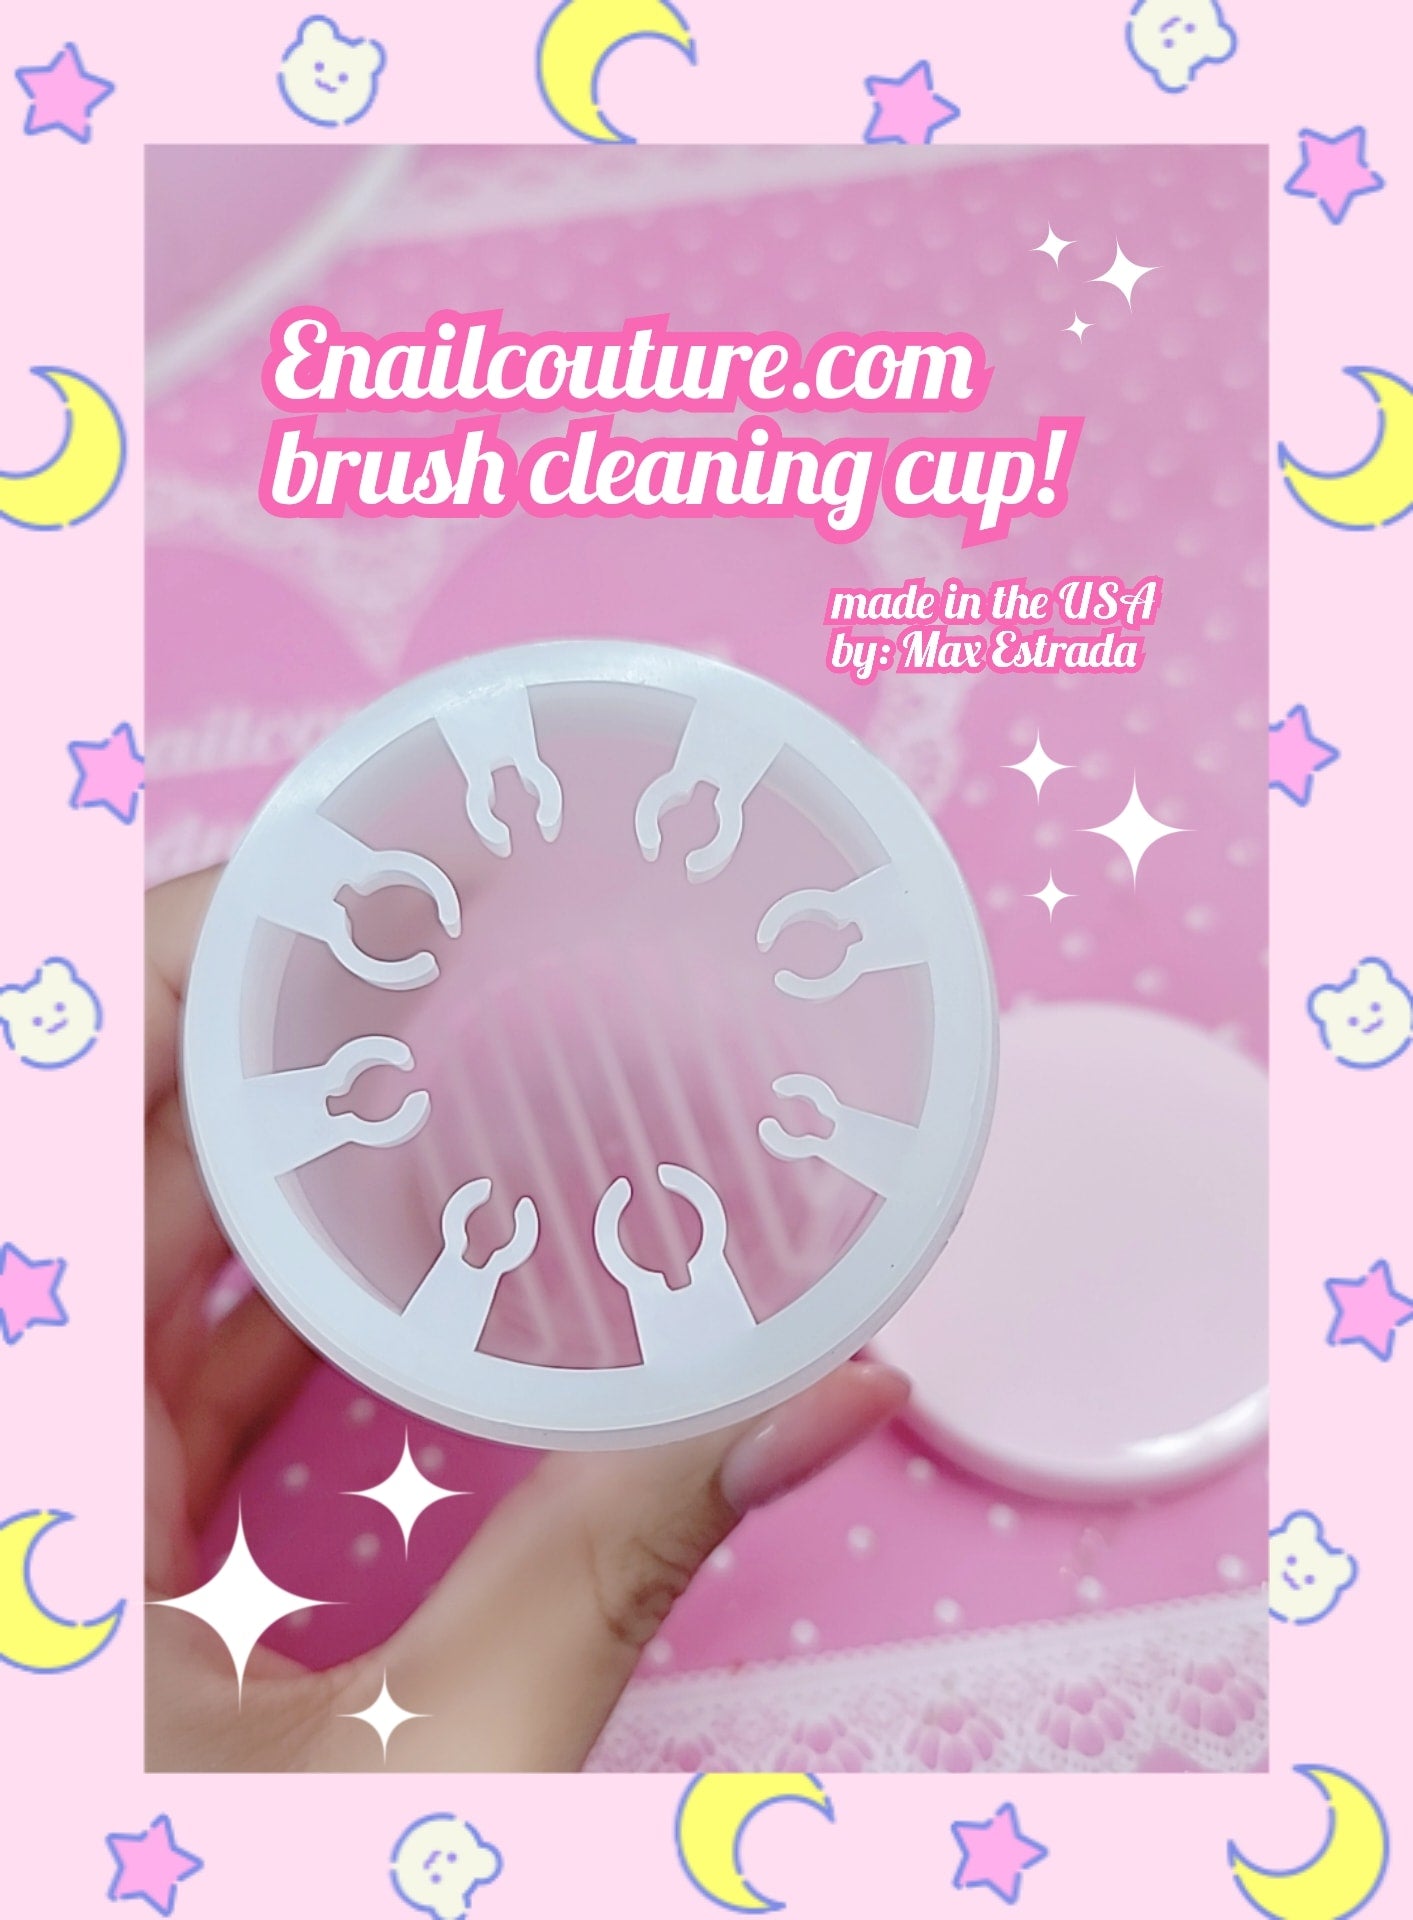 Brush Cleaning Cup (1 Piece Nail Art Brush Cleaner Cup Nail Art Tip Brushes Holder Remover Cup UV Gel Pen Polish Remover Cleanser Cup Immersion Brush Cleaner Pot Multiple Size Slots, pink Lid)